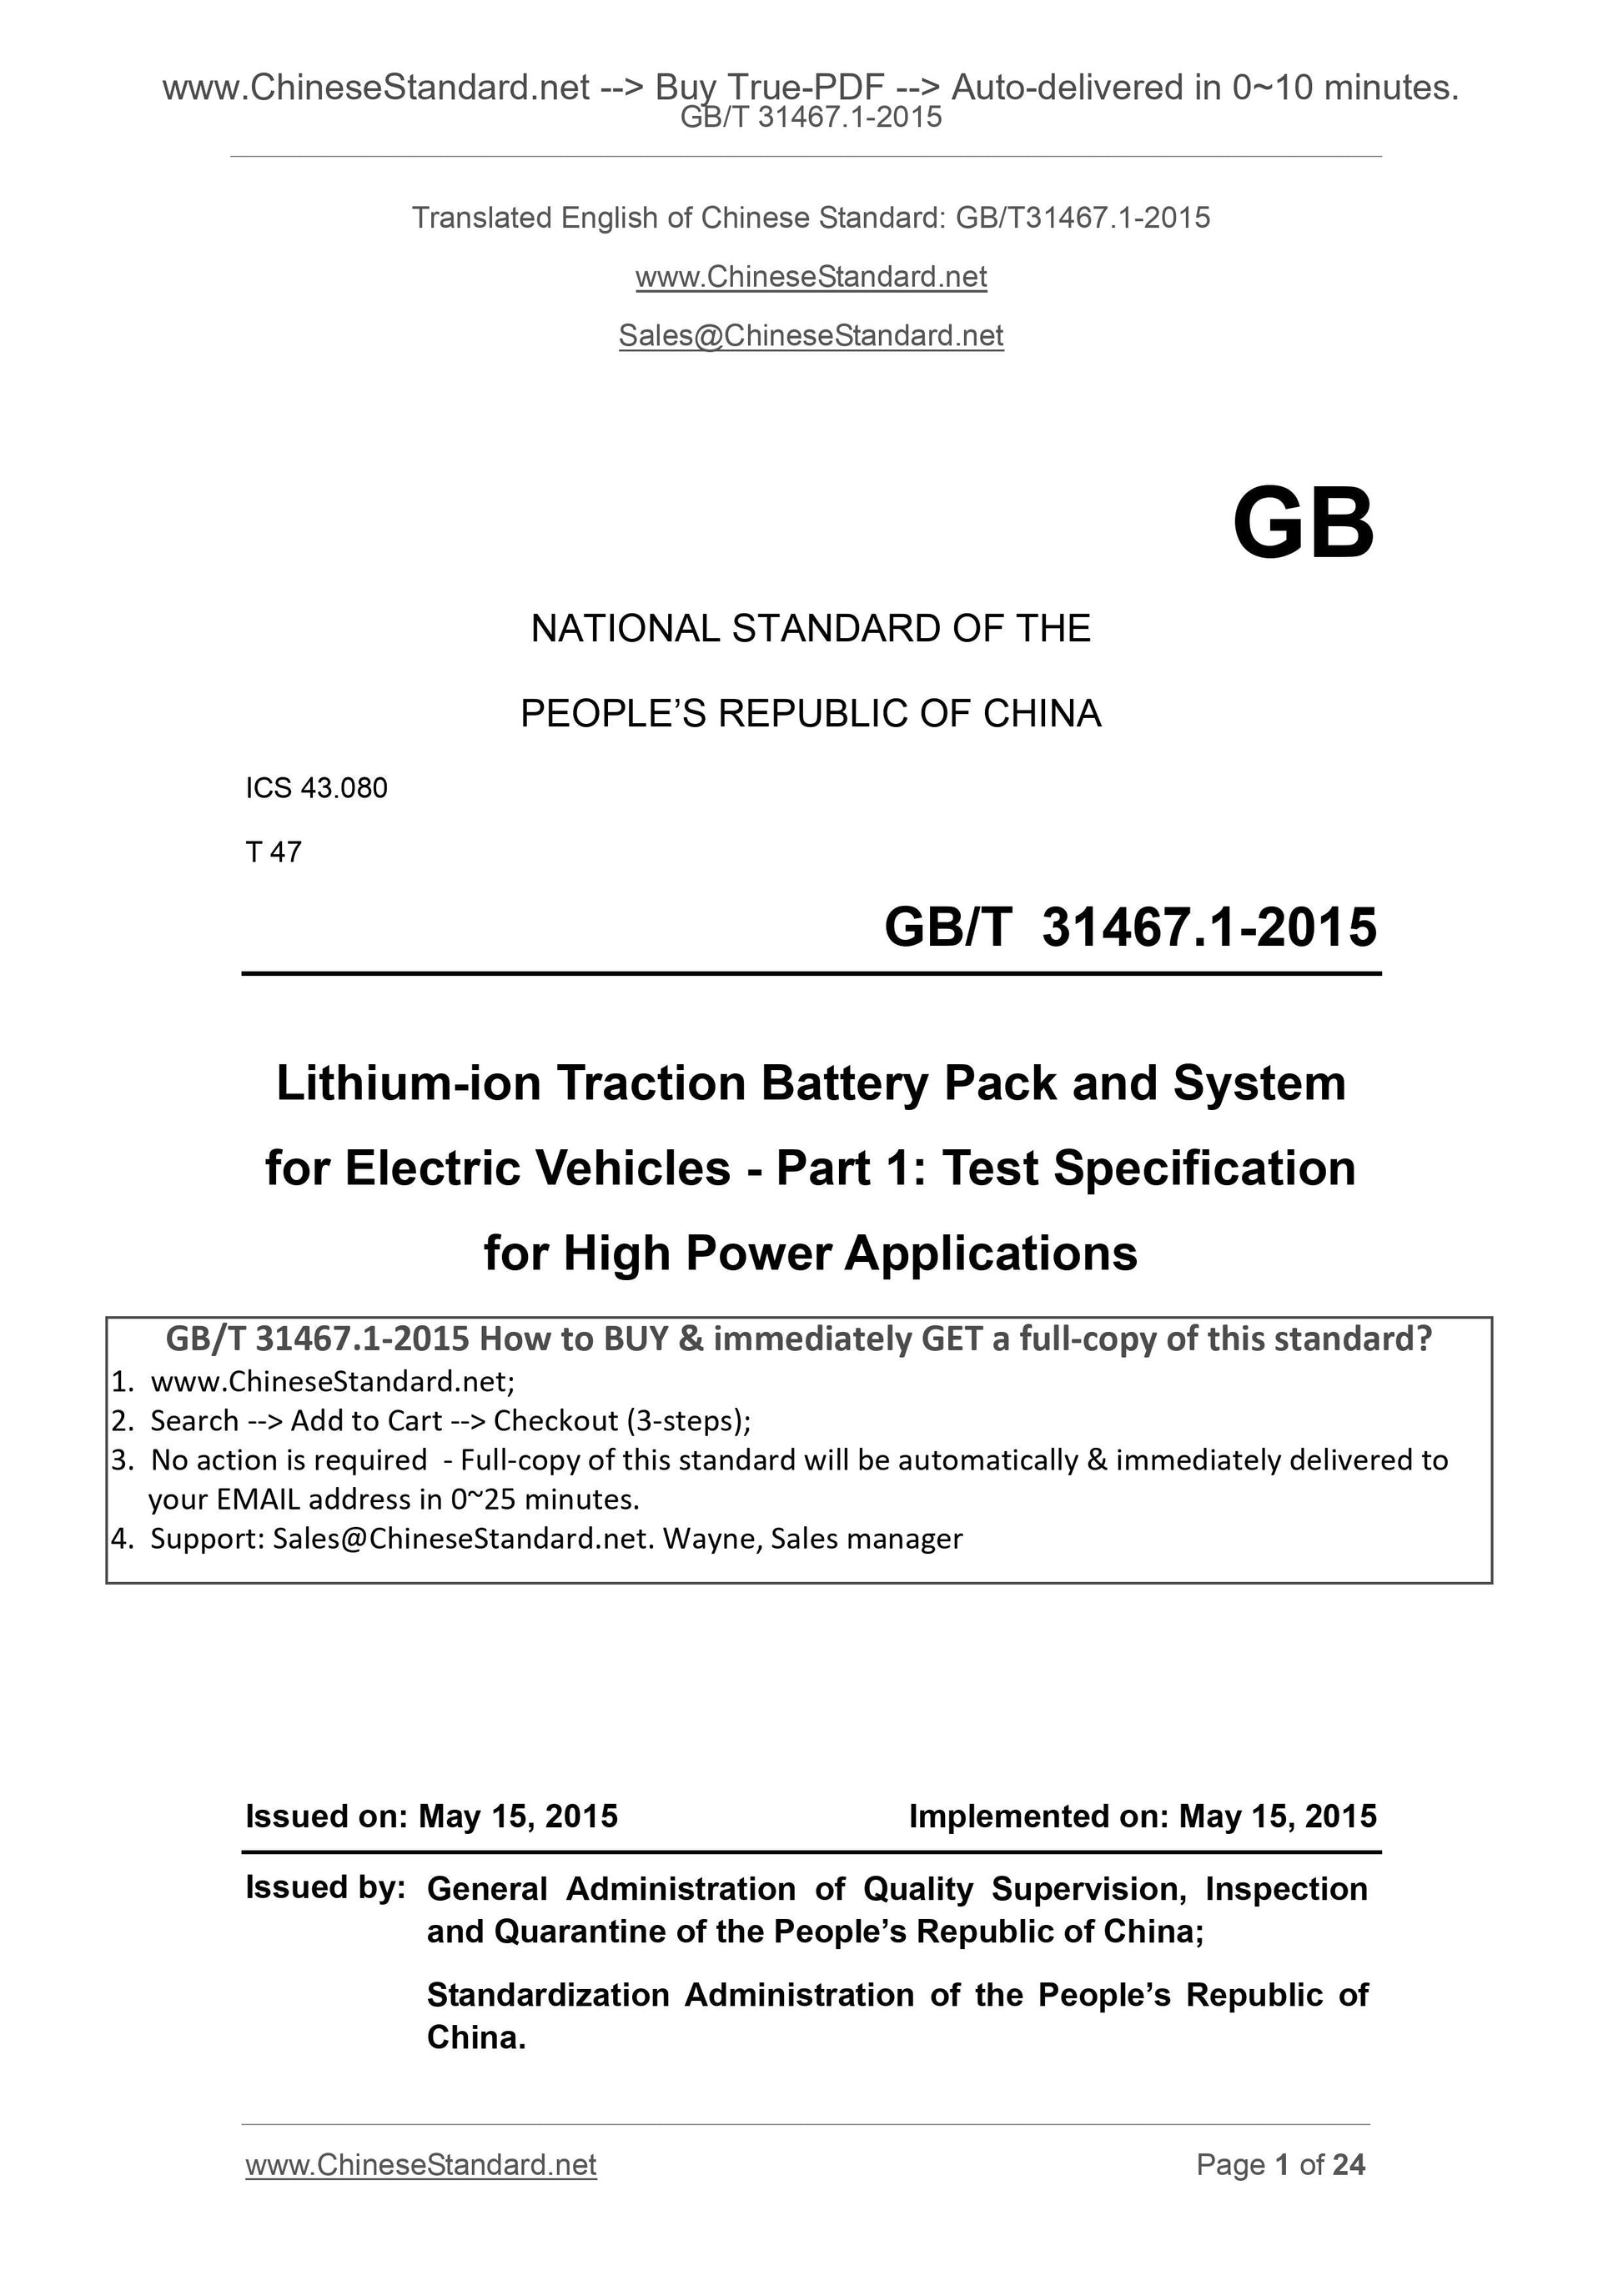 GB/T 31467.1-2015 Page 1